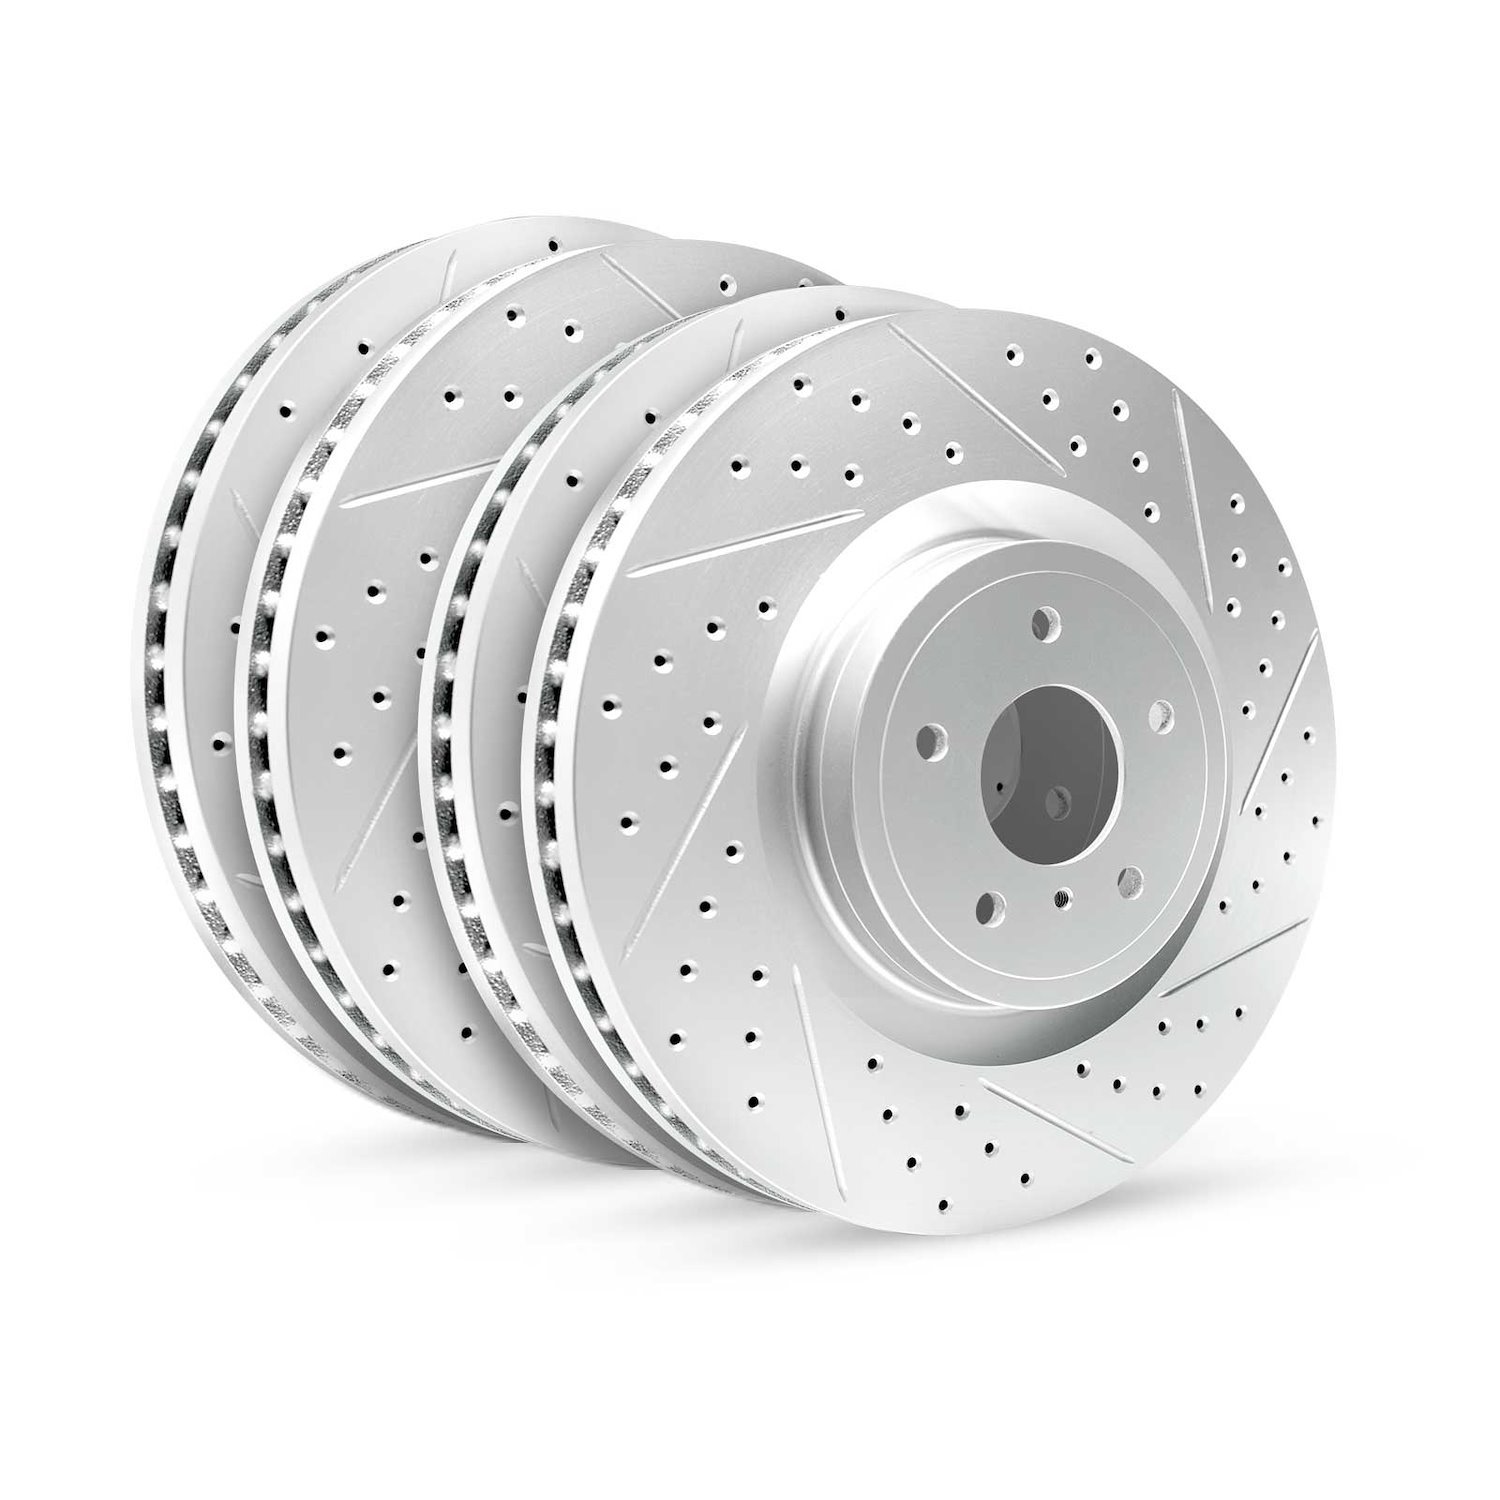 GEO-Carbon Drilled/Slotted Rotors, 1996-2015 Mercedes-Benz, Position: Front/Rear